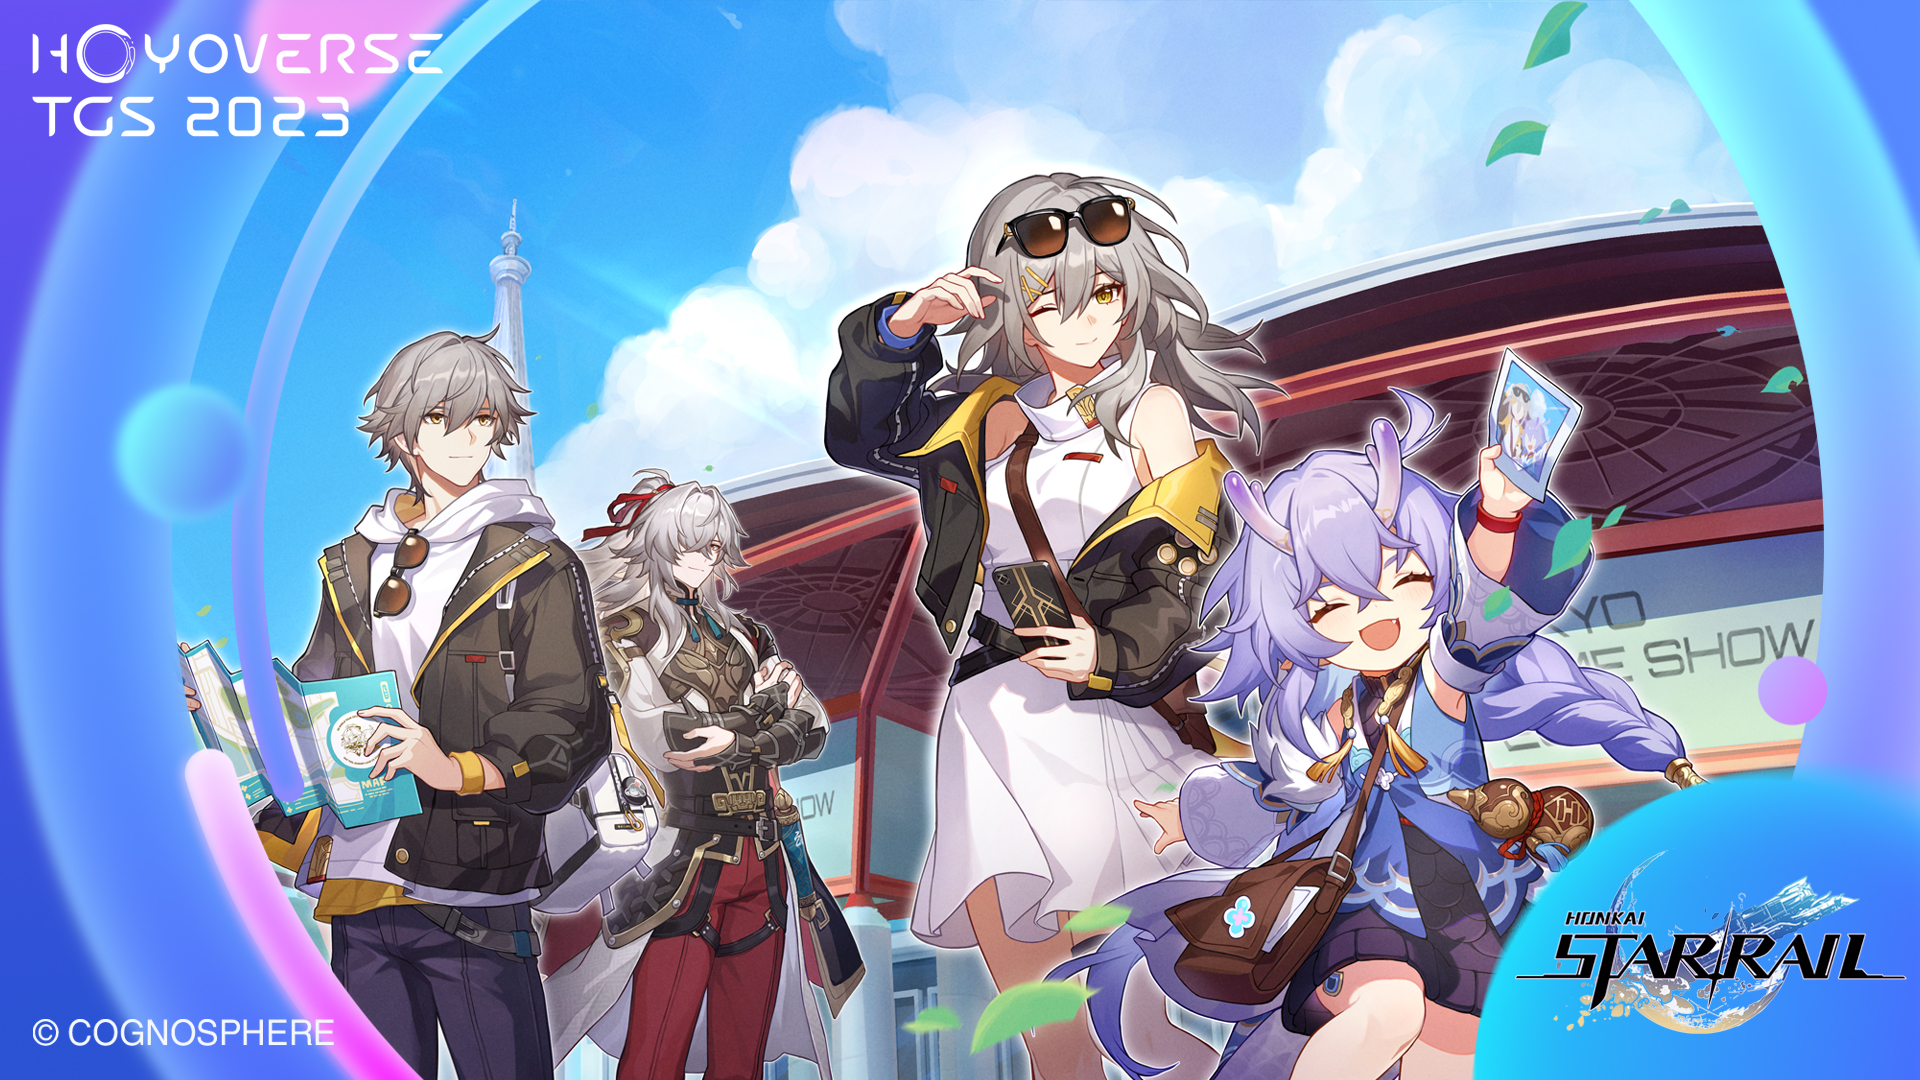 Final Weapon on X: Honkai: Star Rail PS4 and PS5 versions in development,  HoYoverse to attend Gamescom and Tokyo Game Show 2023    / X